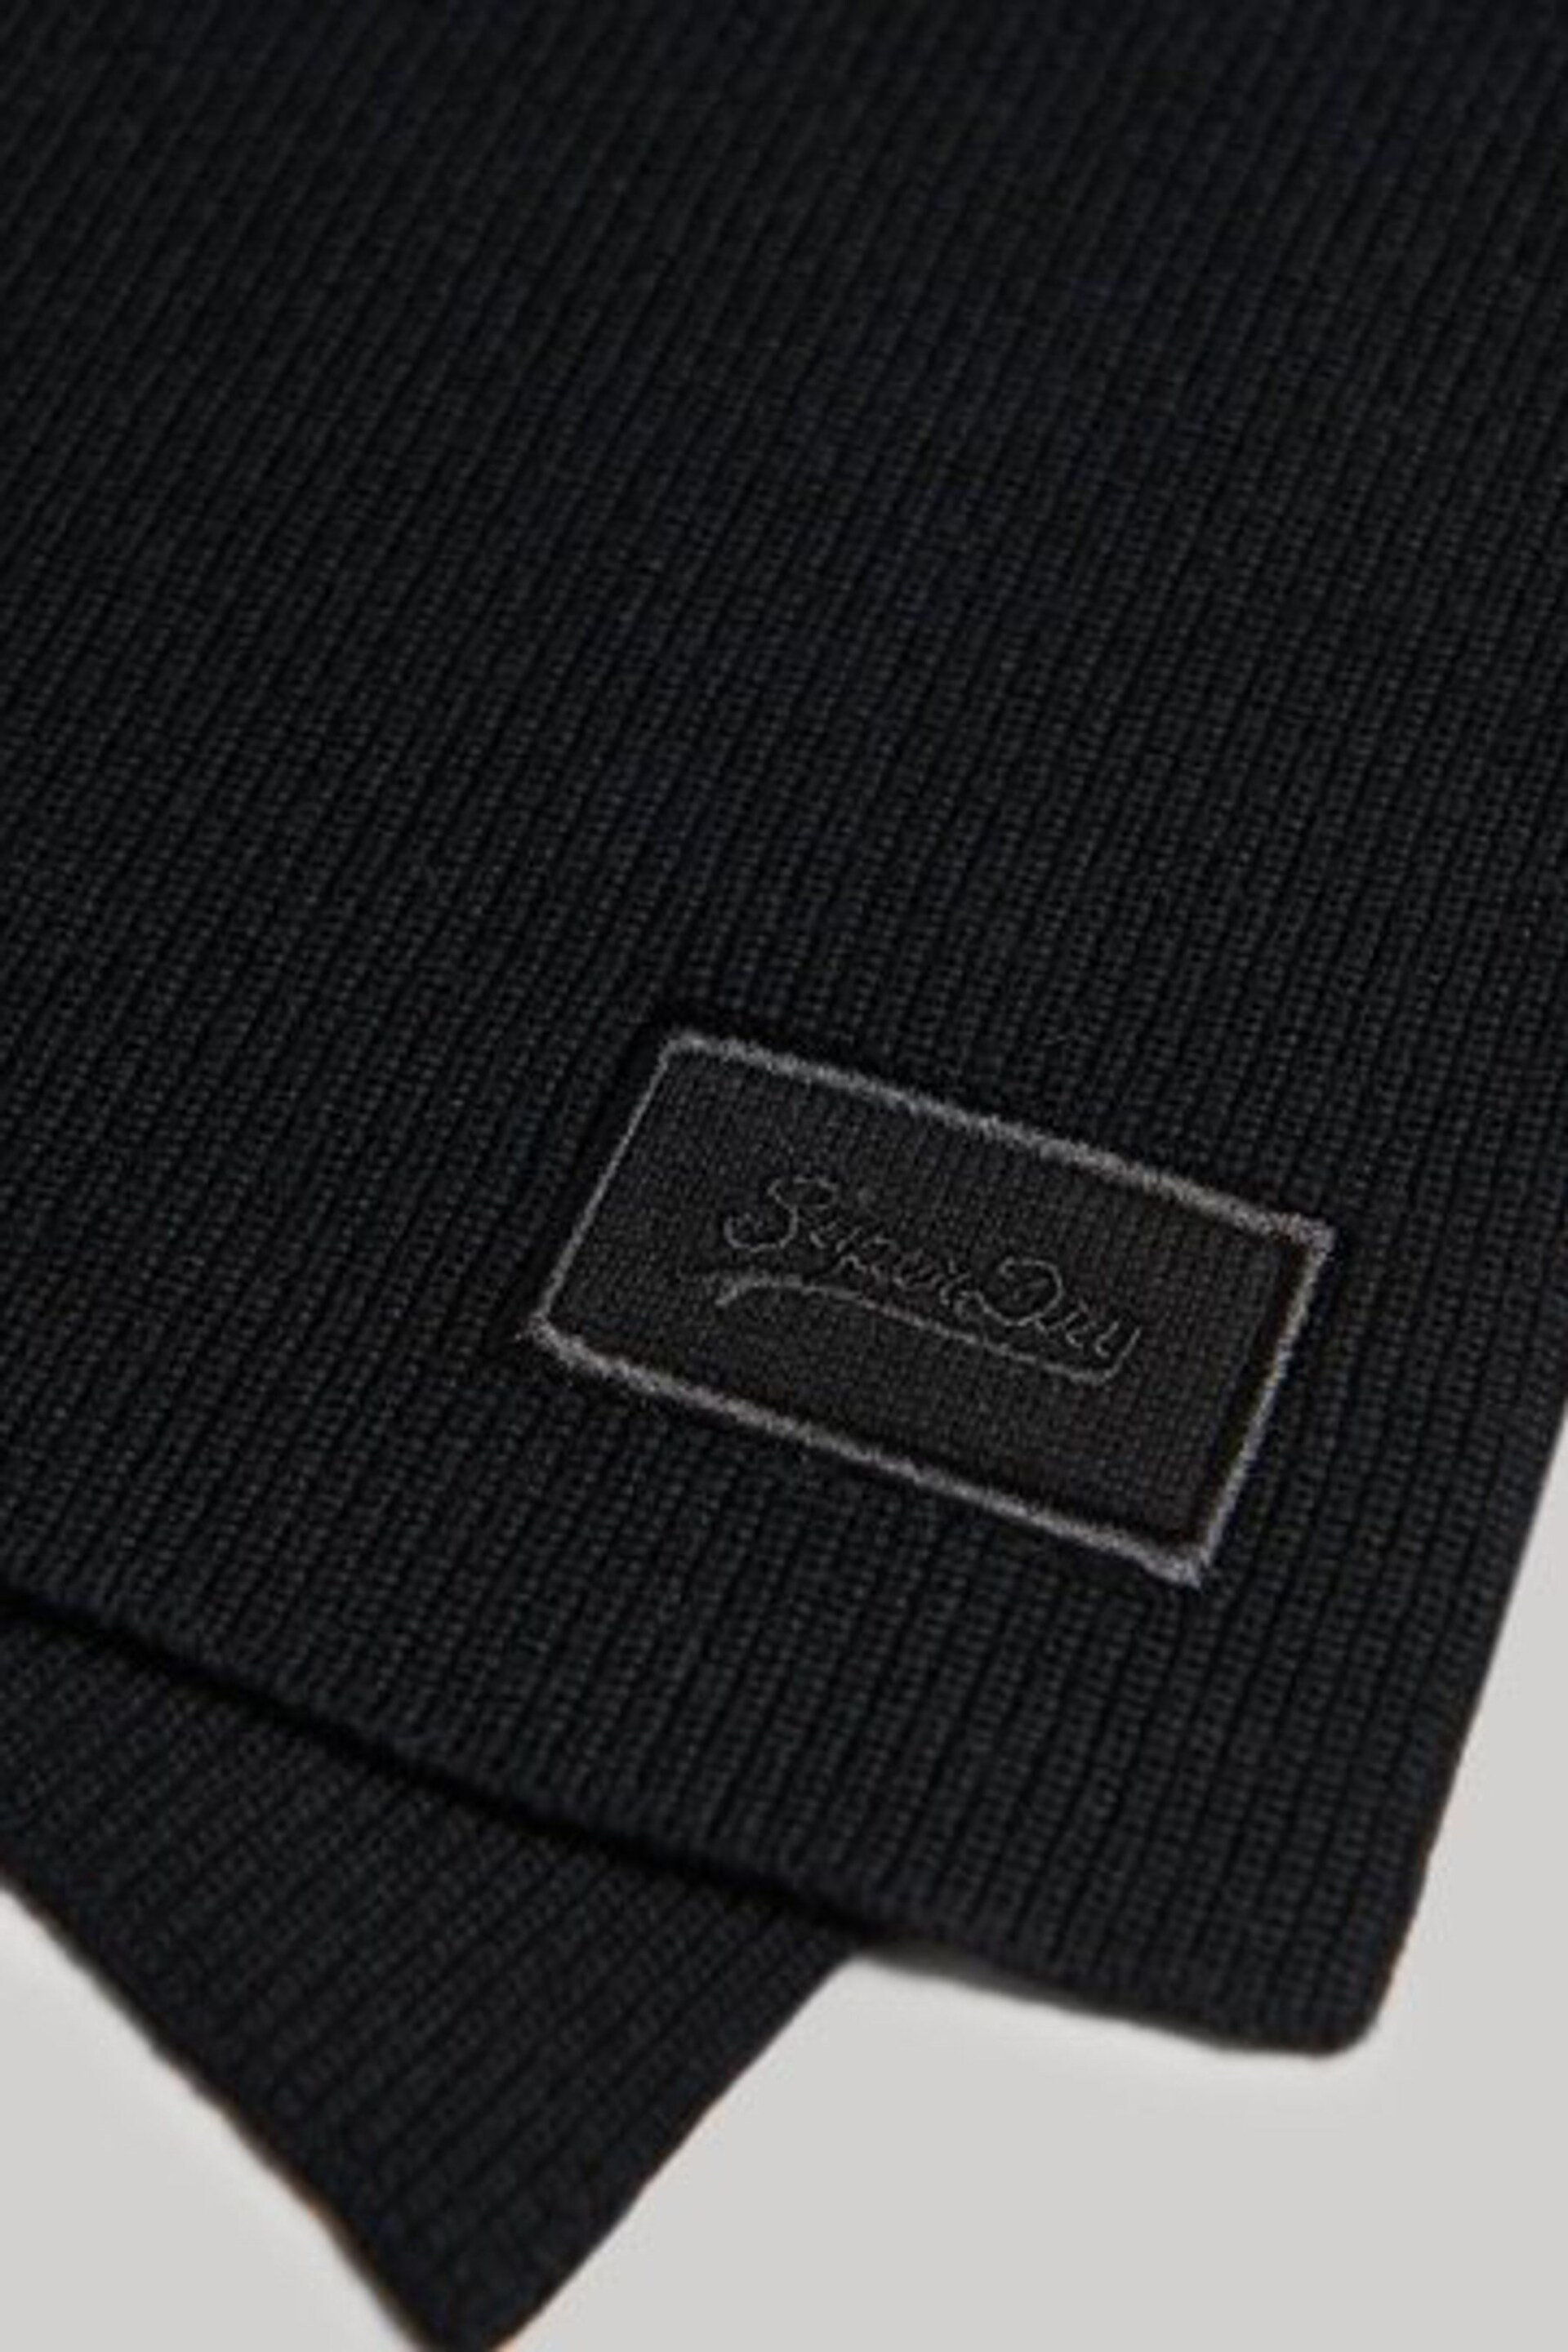 Superdry Black Knitted Logo Scarf - Image 3 of 3